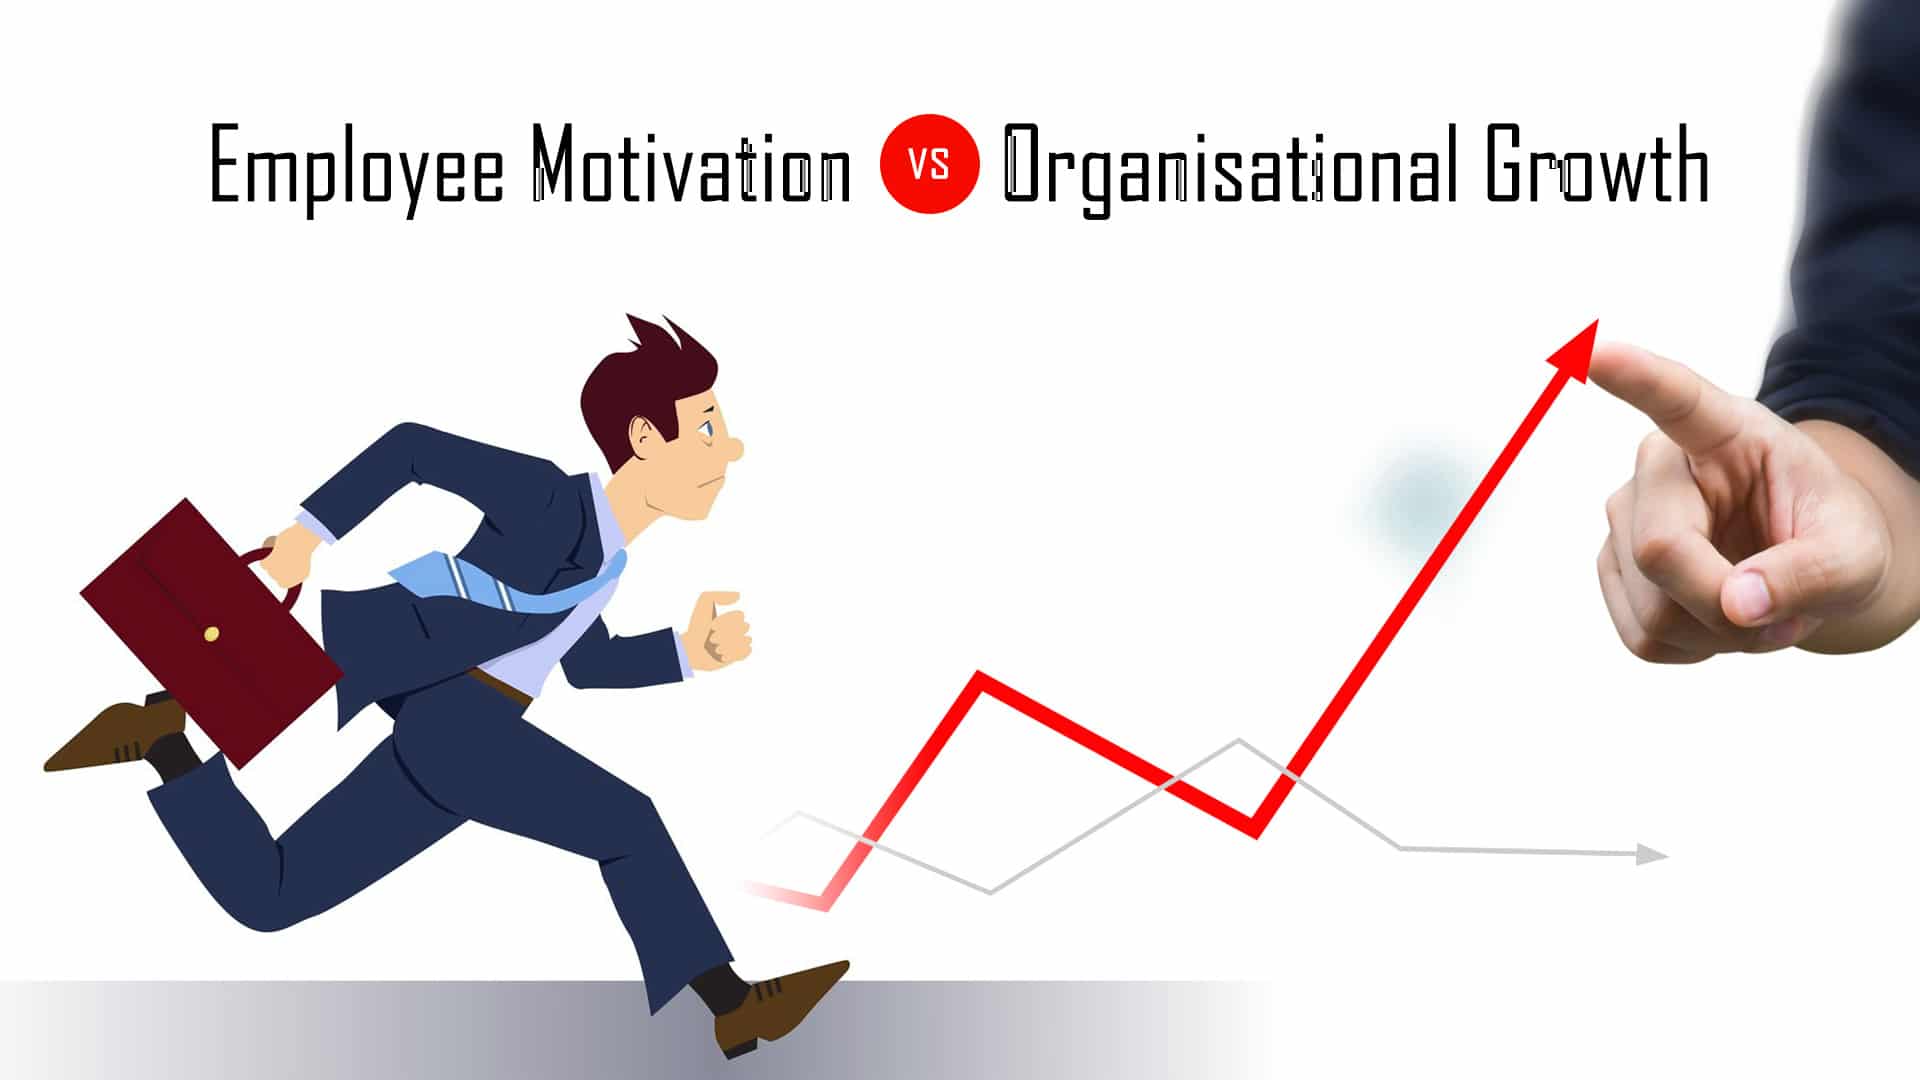 How to increase Organisational Growth by Employee Motivation